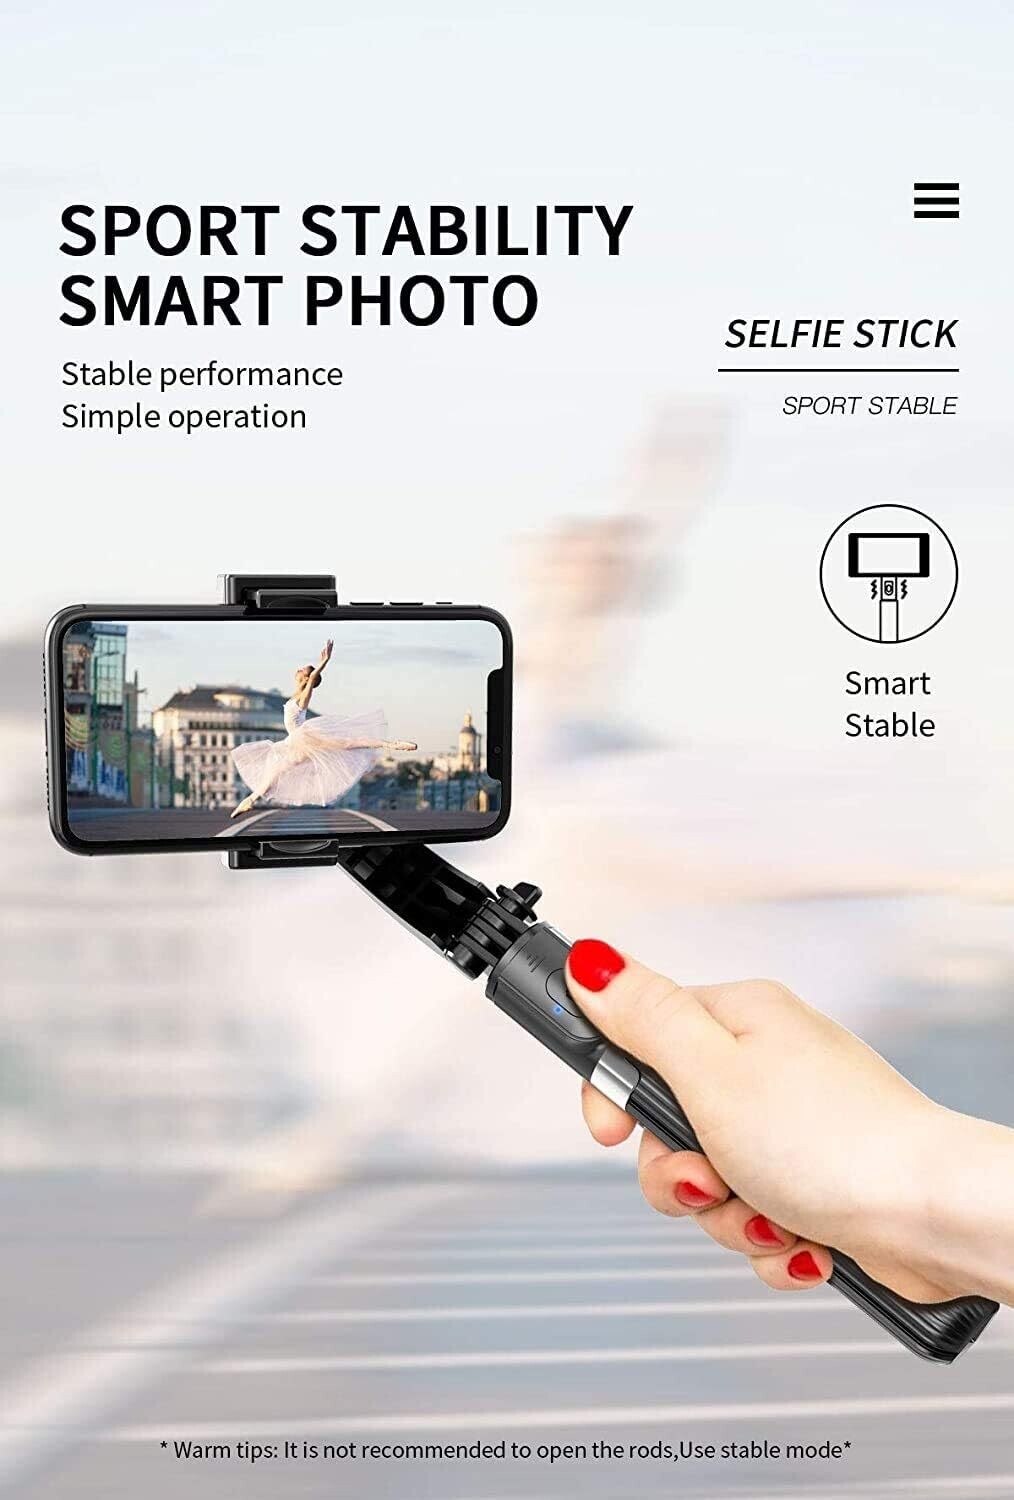 L08 Handheld Gimbal
Gimbal Stabilizer for Smartphone